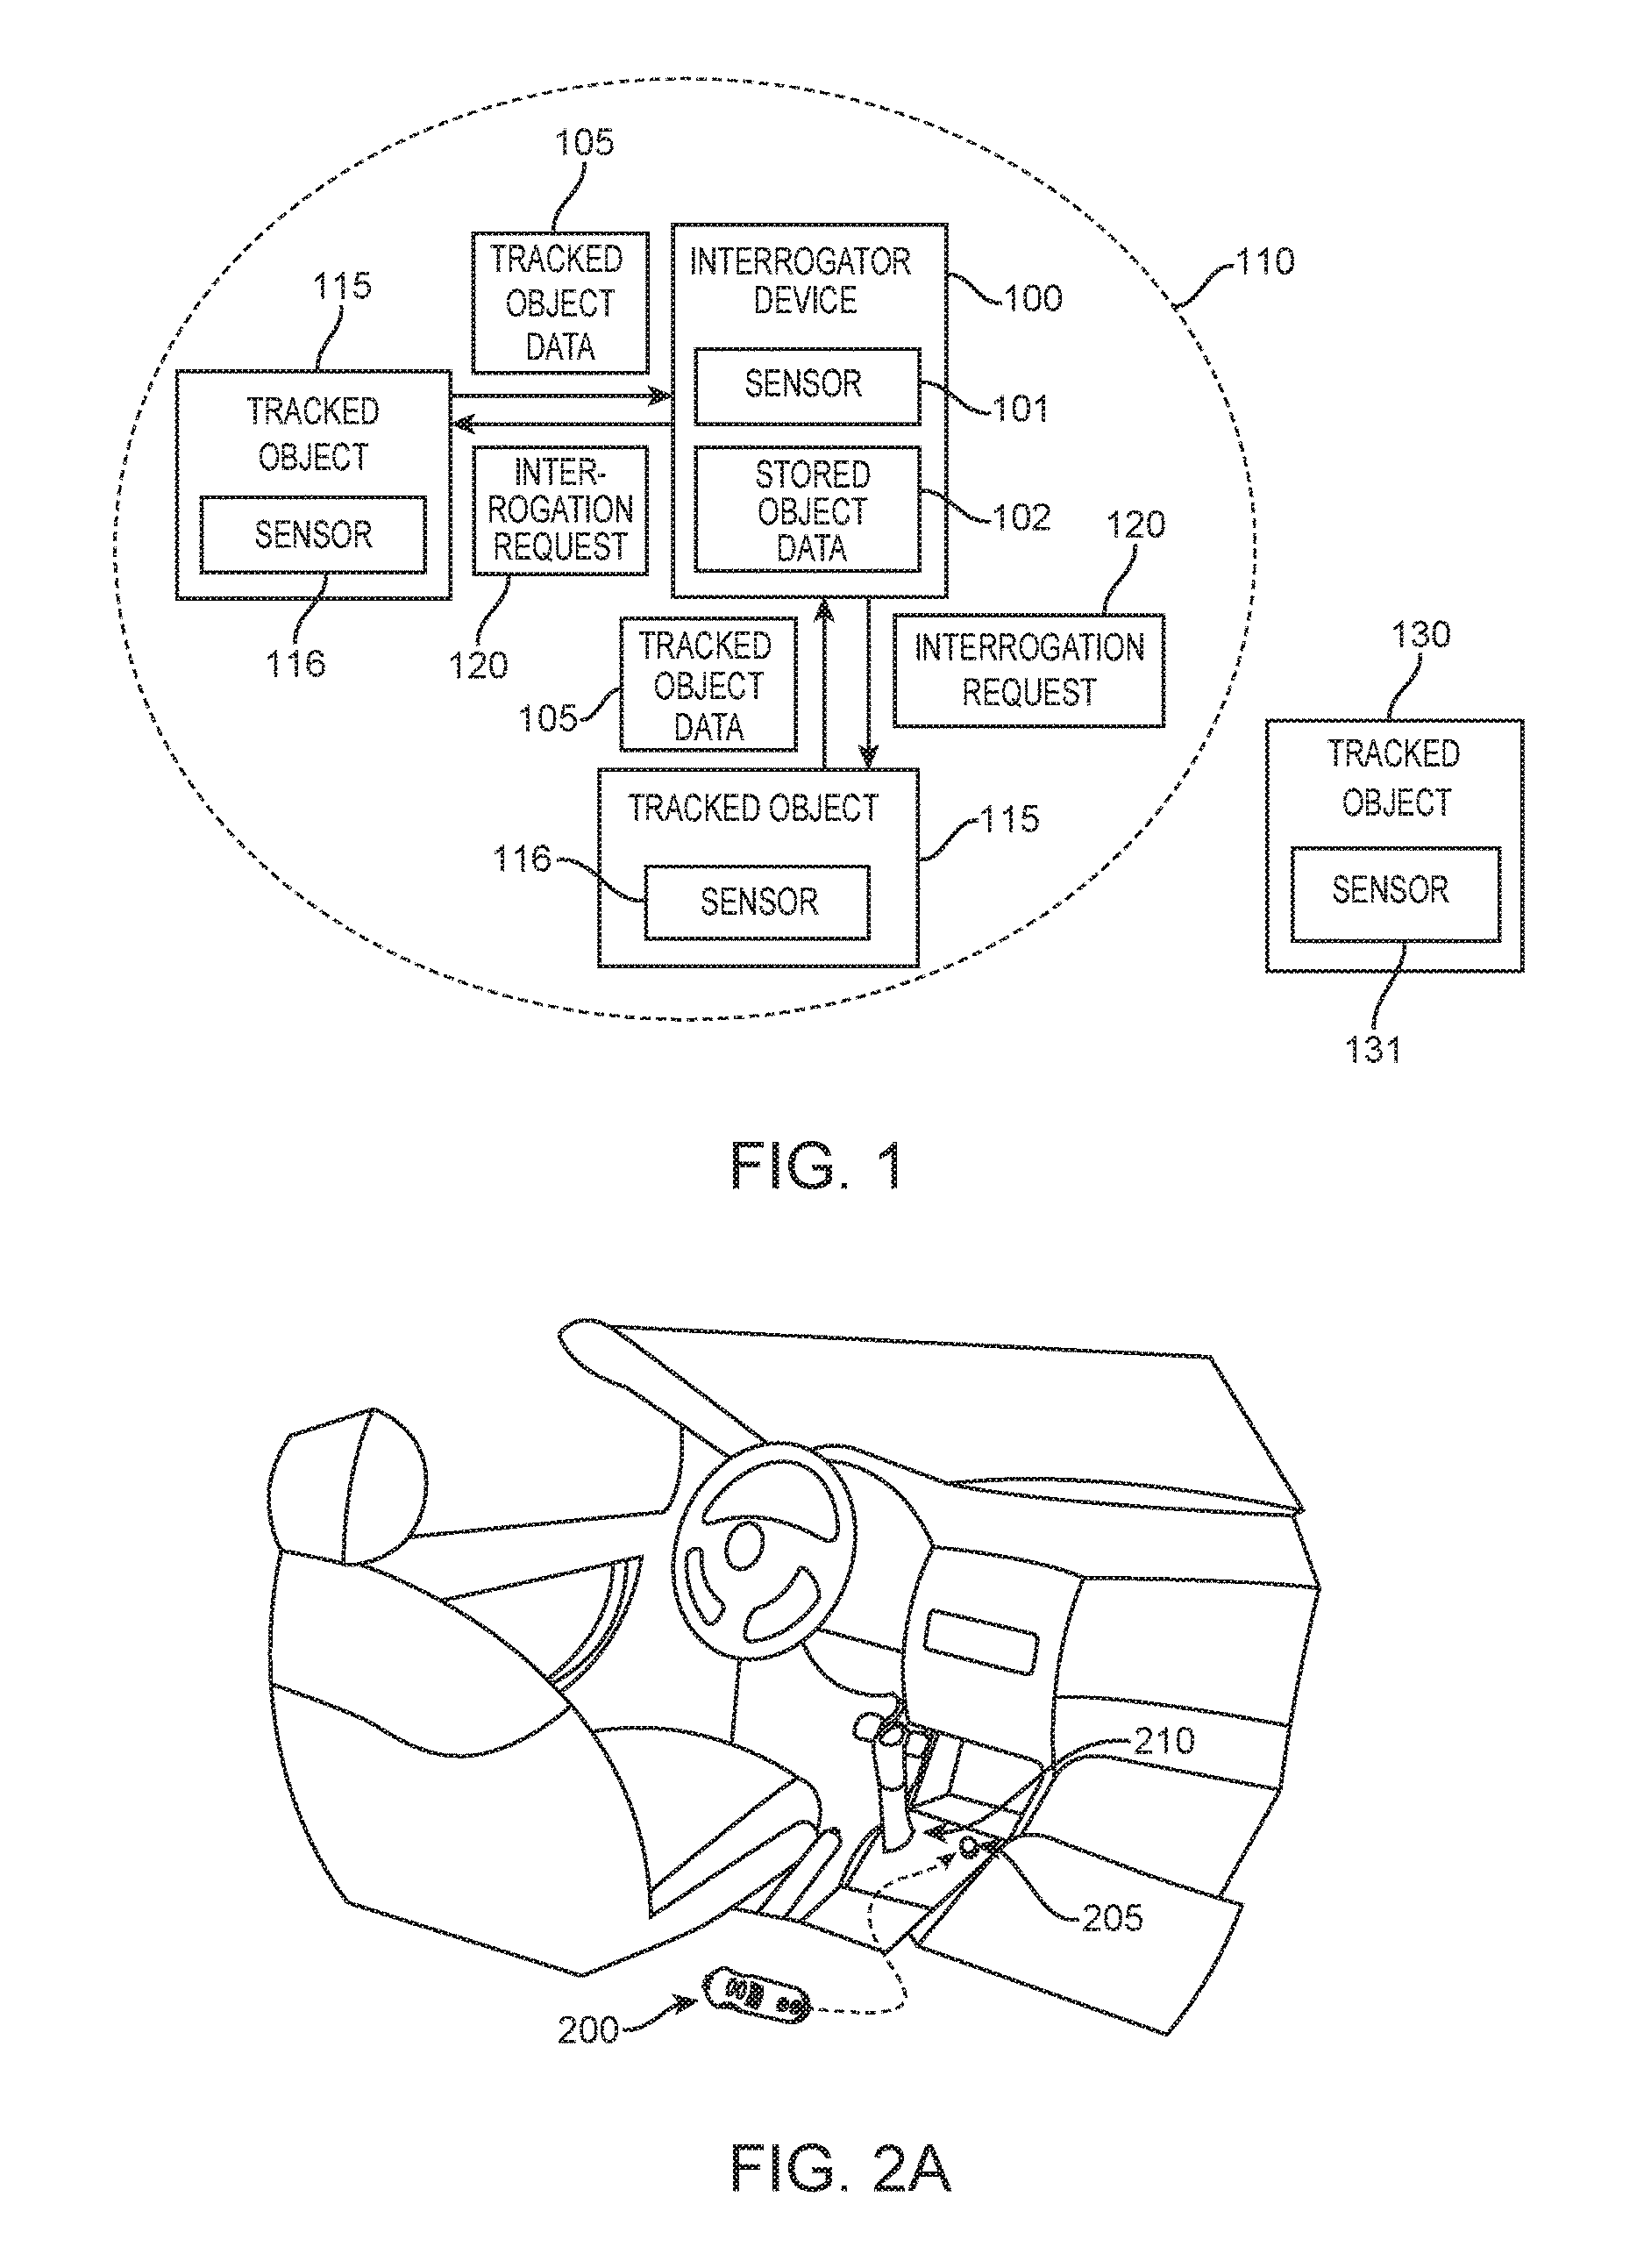 Method and device to set household parameters based on the movement of items